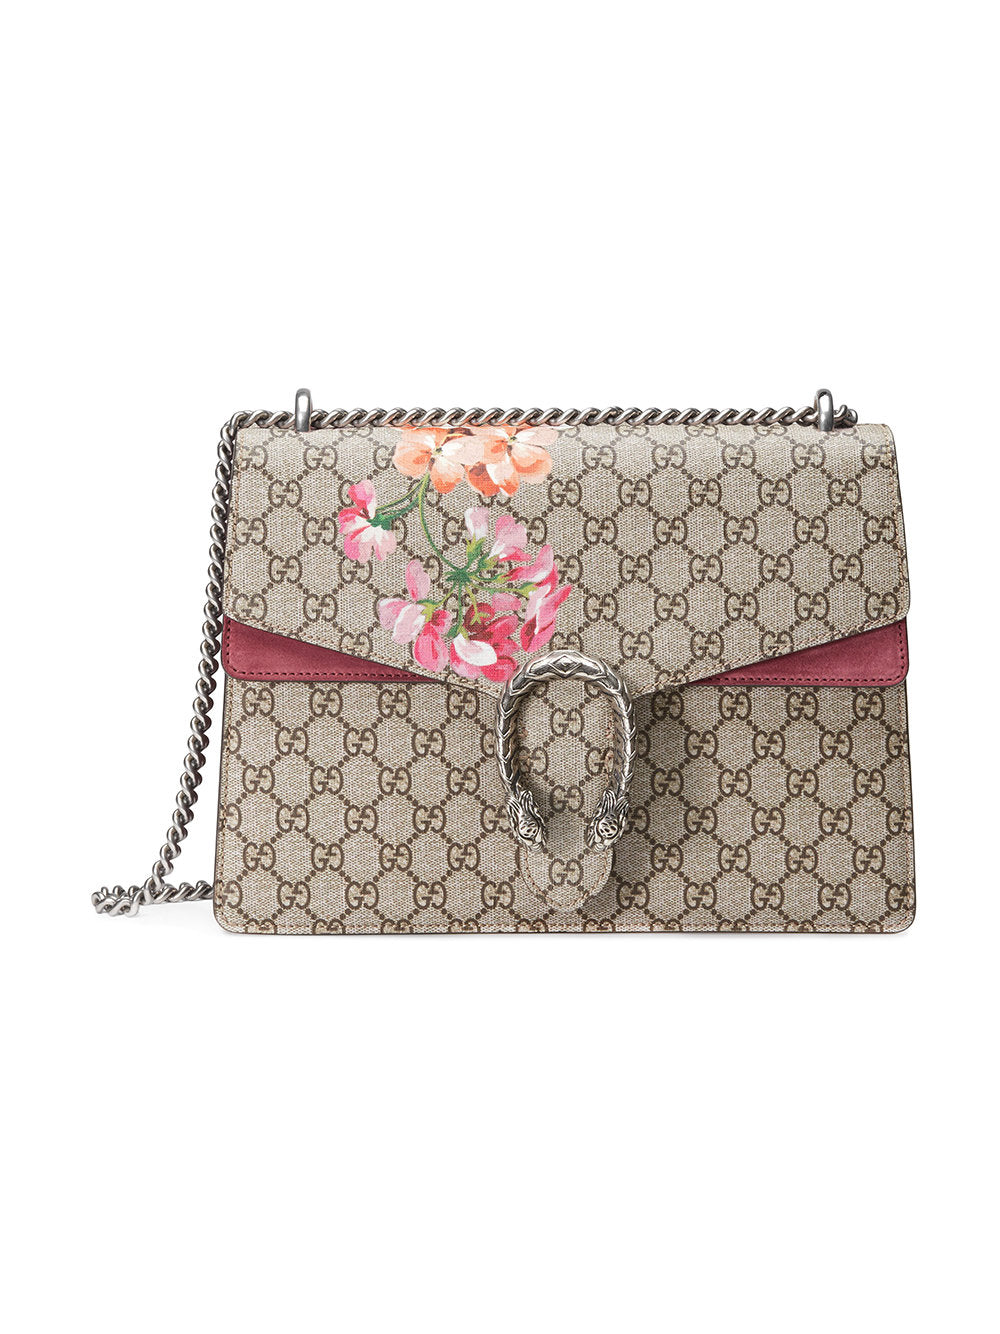 Re-sell Your Gucci Handbags Online | Rebag